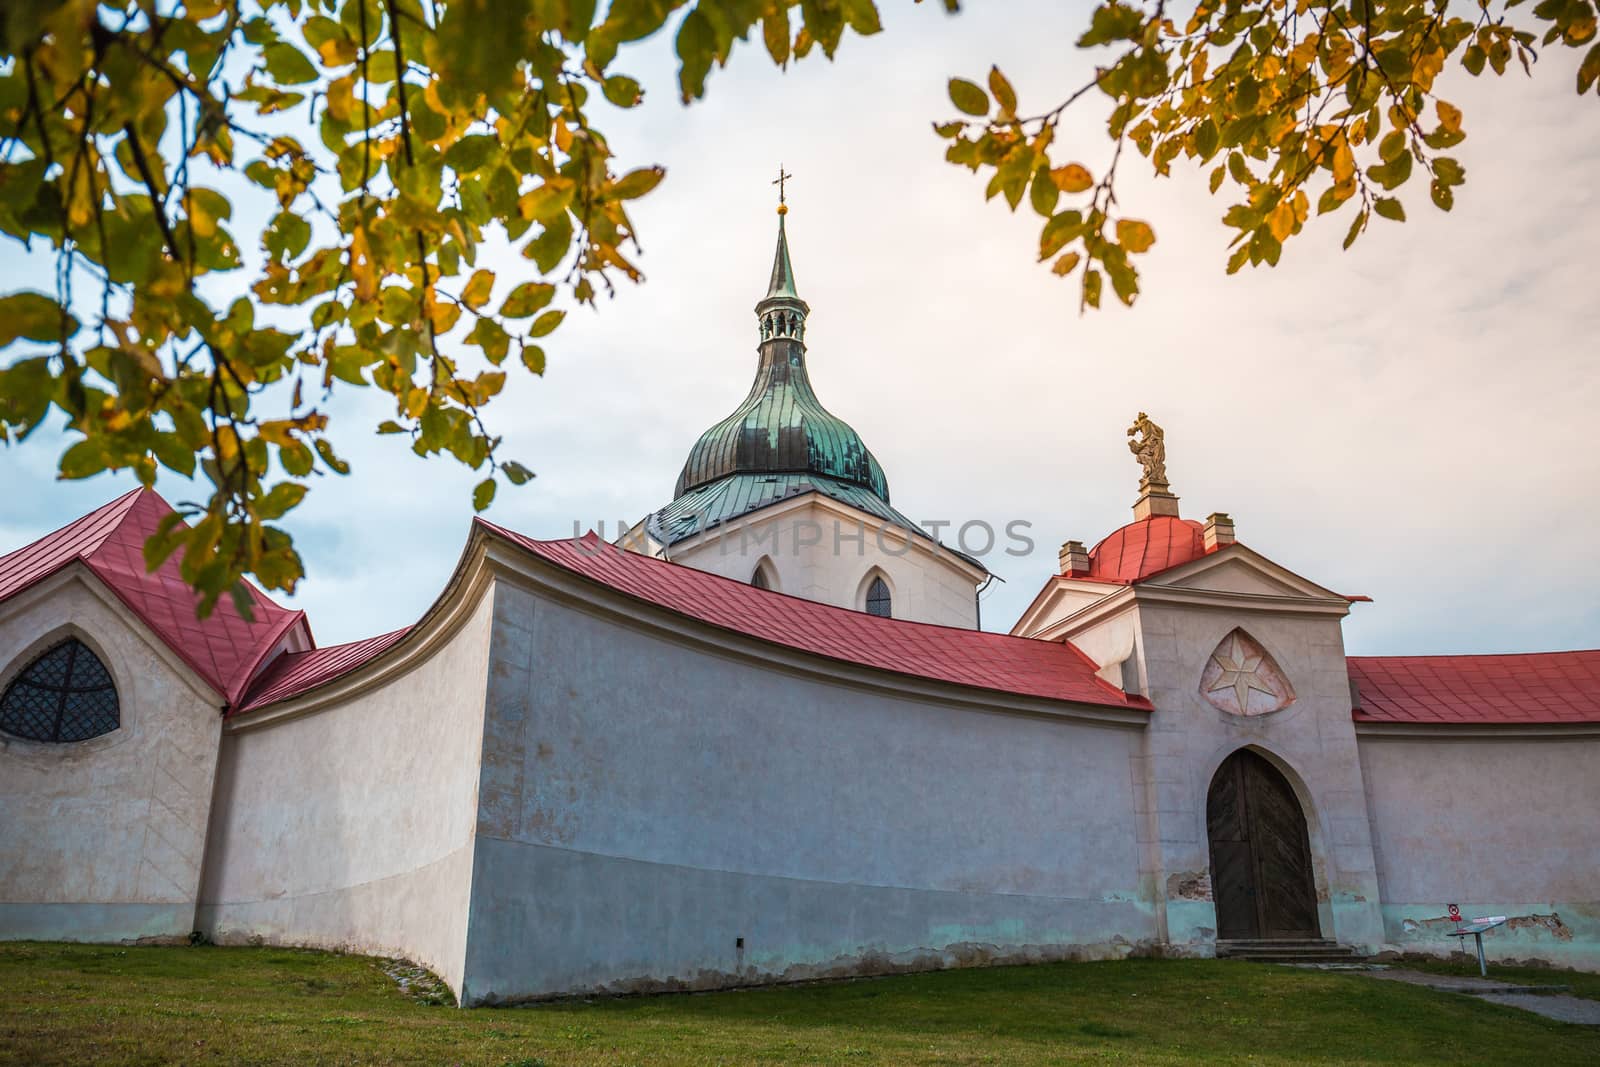 Pilgrimage Church of St John of Nepomuk at Zelena hora in Zdar nad Sazavou, national cultural heritage and the UNESCO World heritage monument - close up shot with autumn leaves in the foreground. by petrsvoboda91